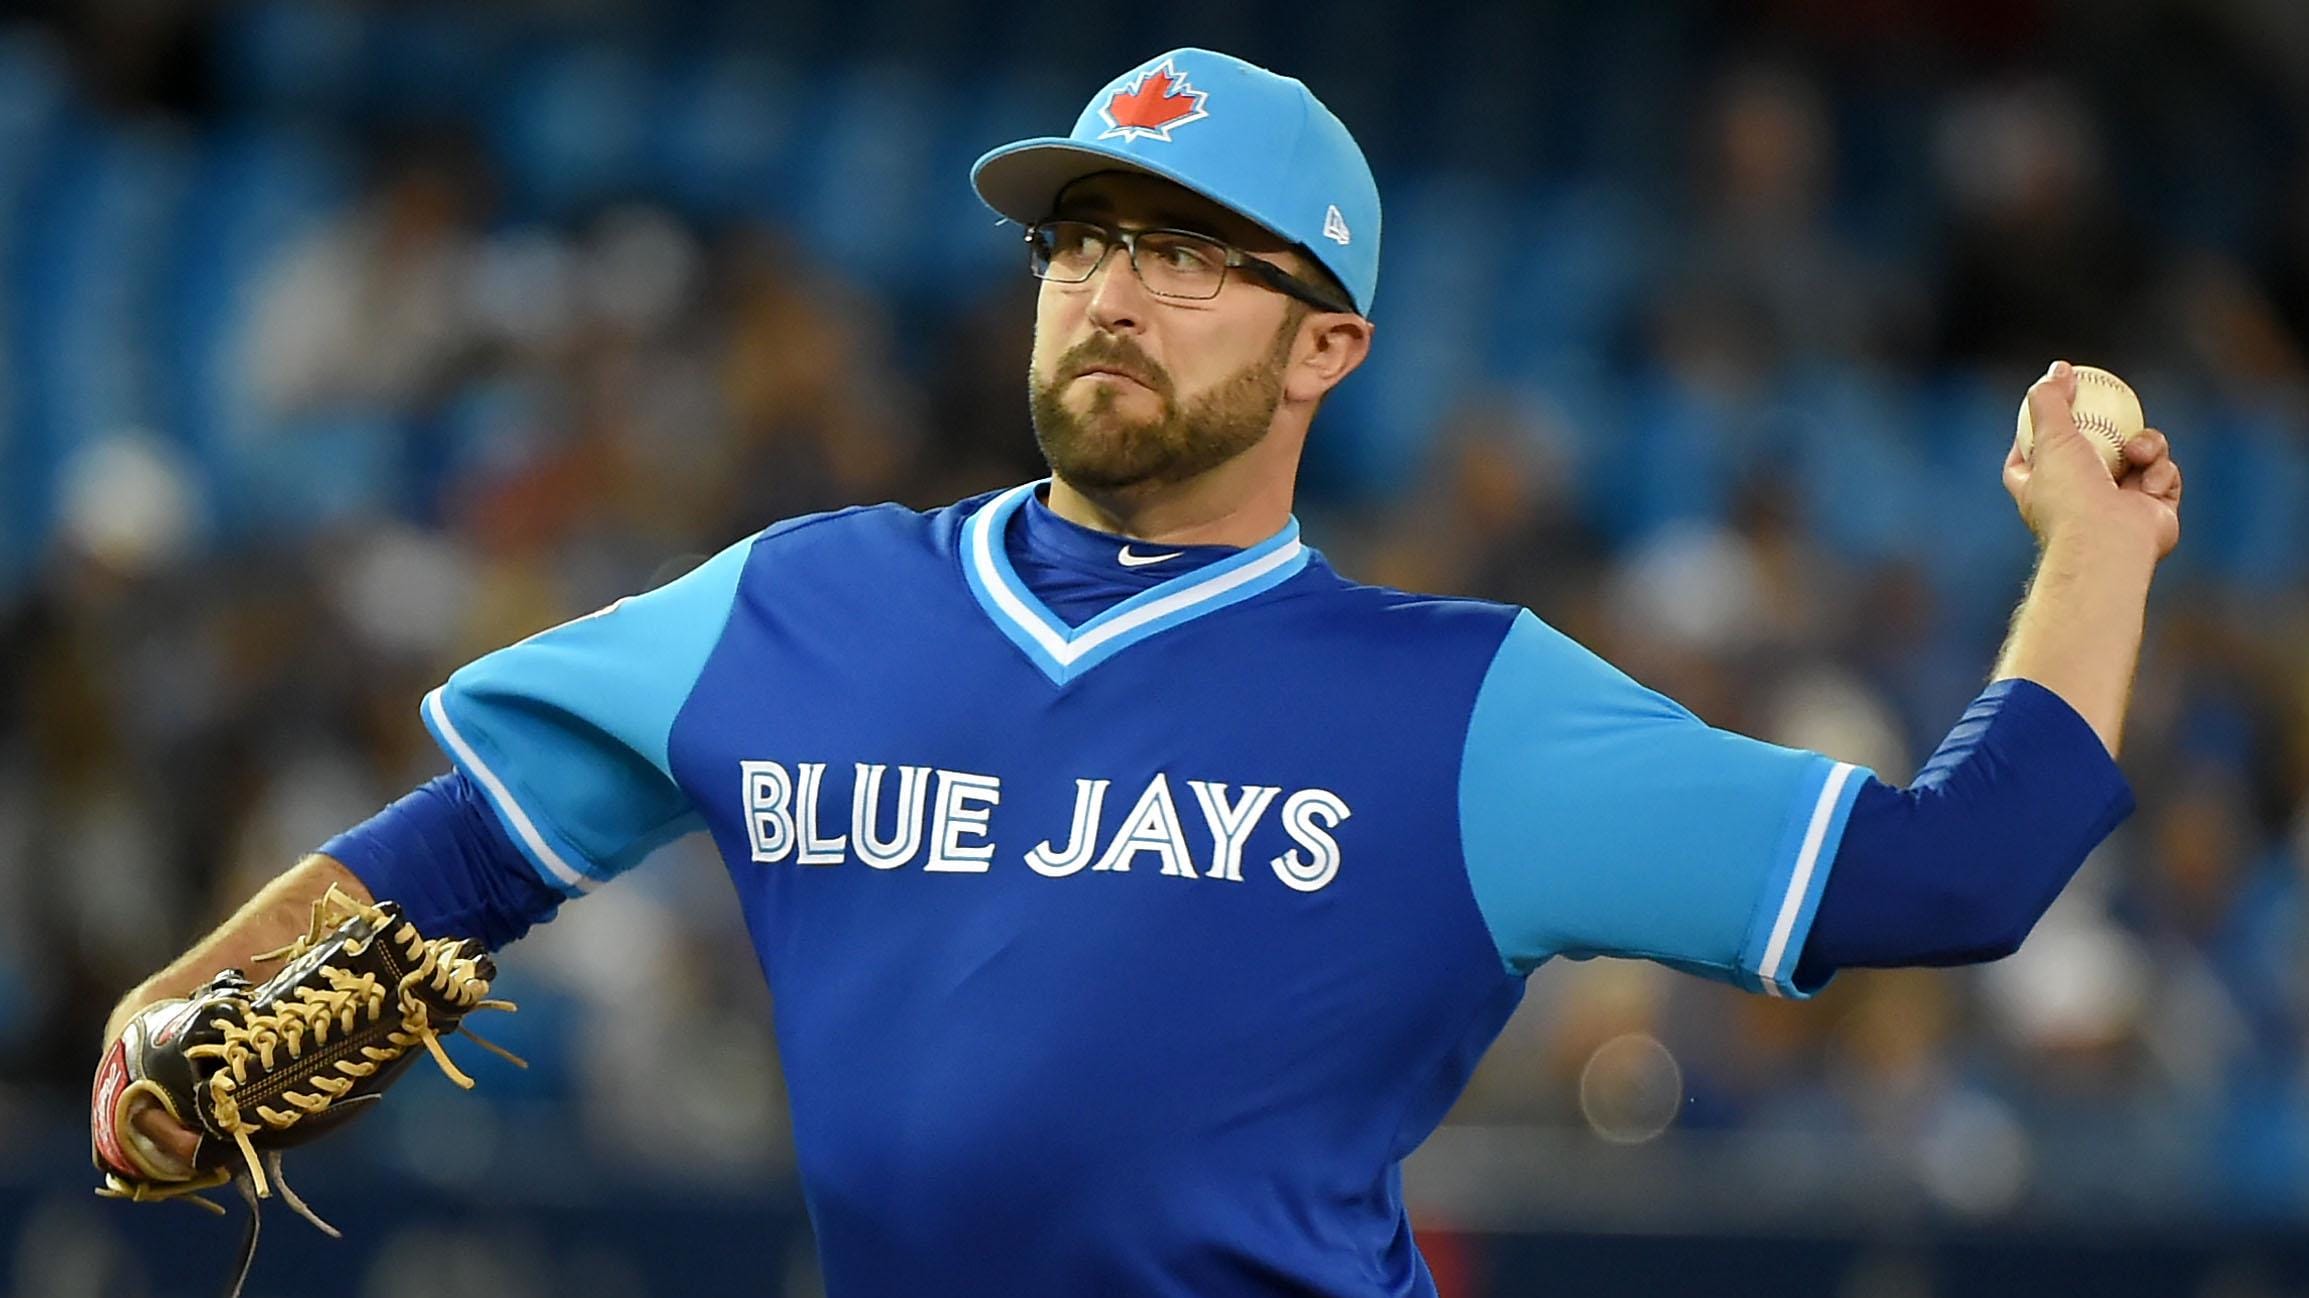 TJ House delivers a pitch for the Toronto Blue Jays